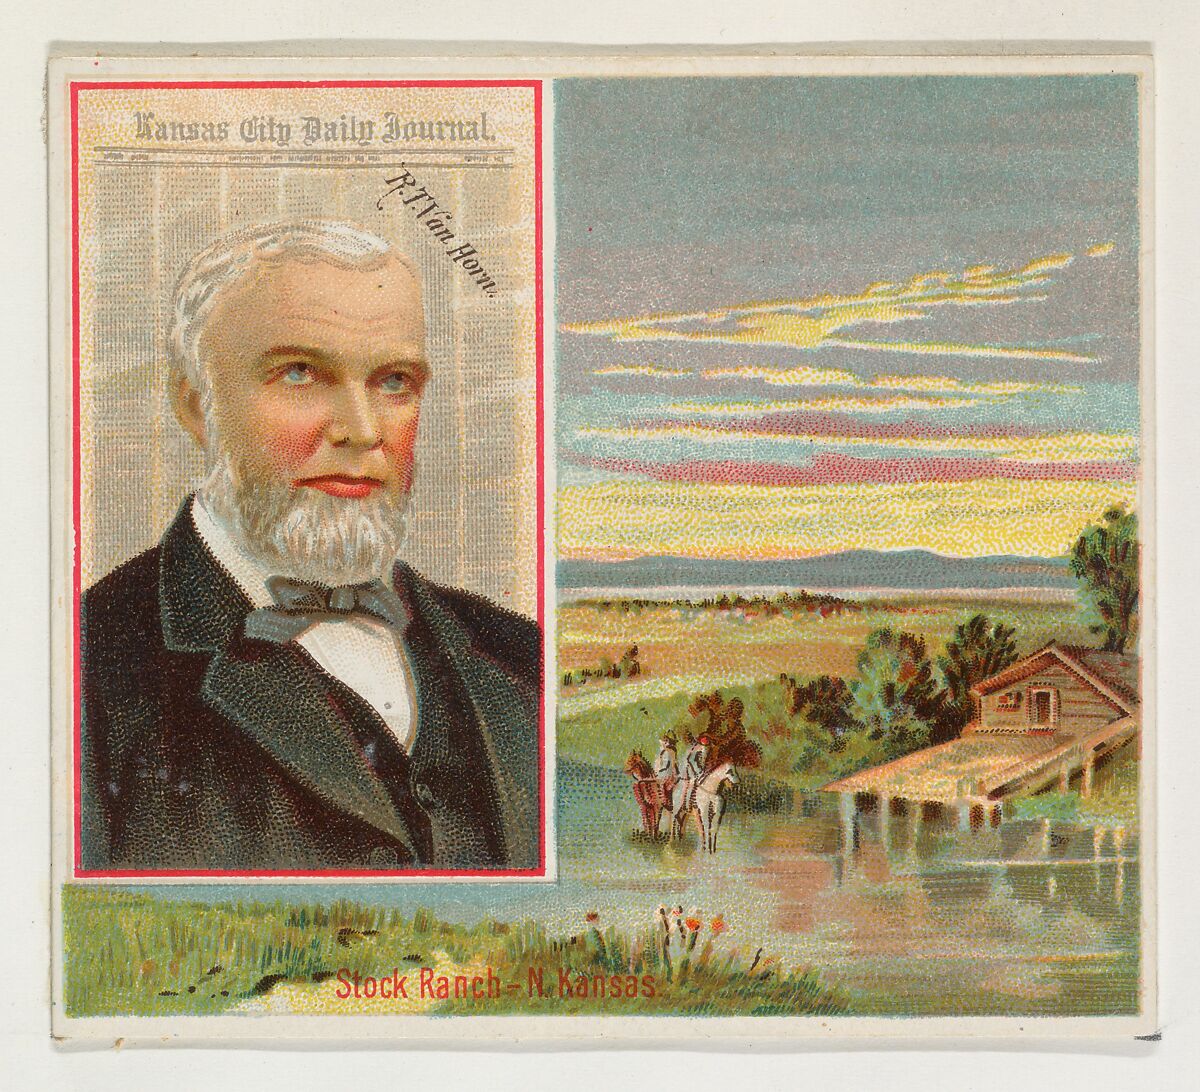 R. T. Van Horn, Kansas City Daily Journal, from the American Editors series (N35) for Allen & Ginter Cigarettes, Issued by Allen &amp; Ginter (American, Richmond, Virginia), Commercial color lithograph 